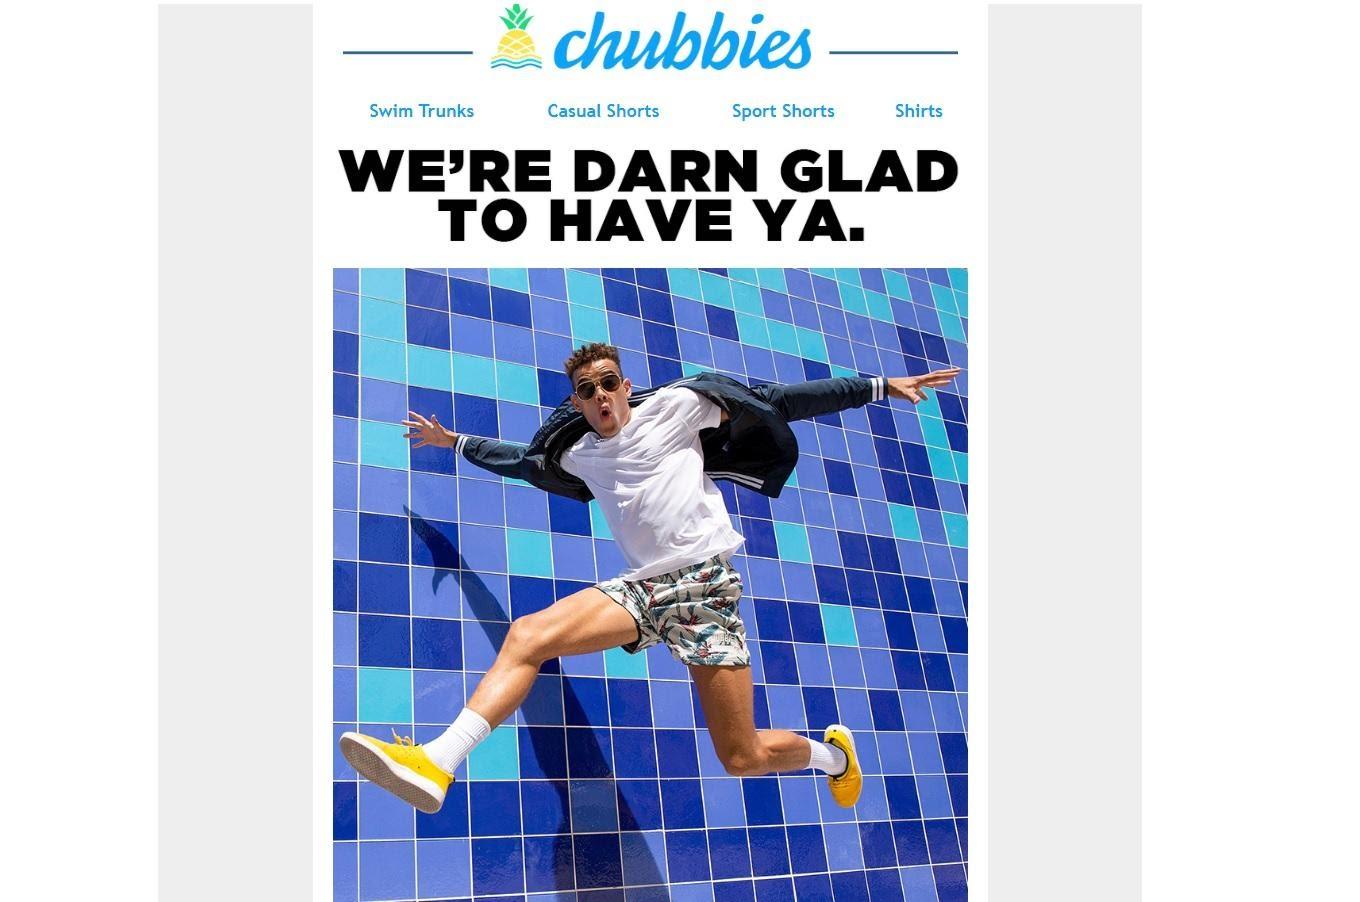 Chubbies email promo